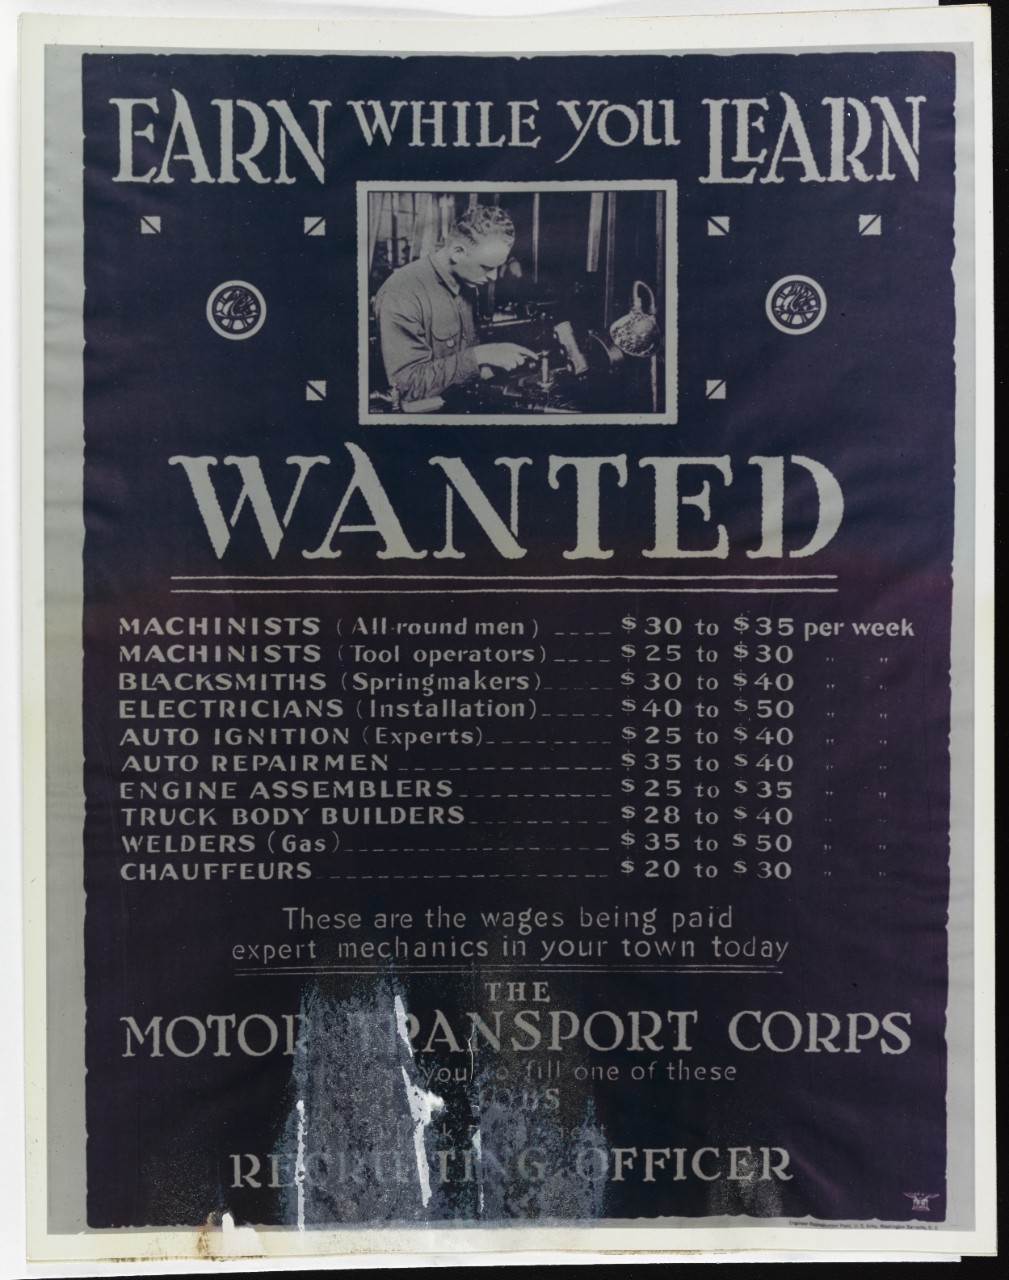 Army World War I recruiting poster